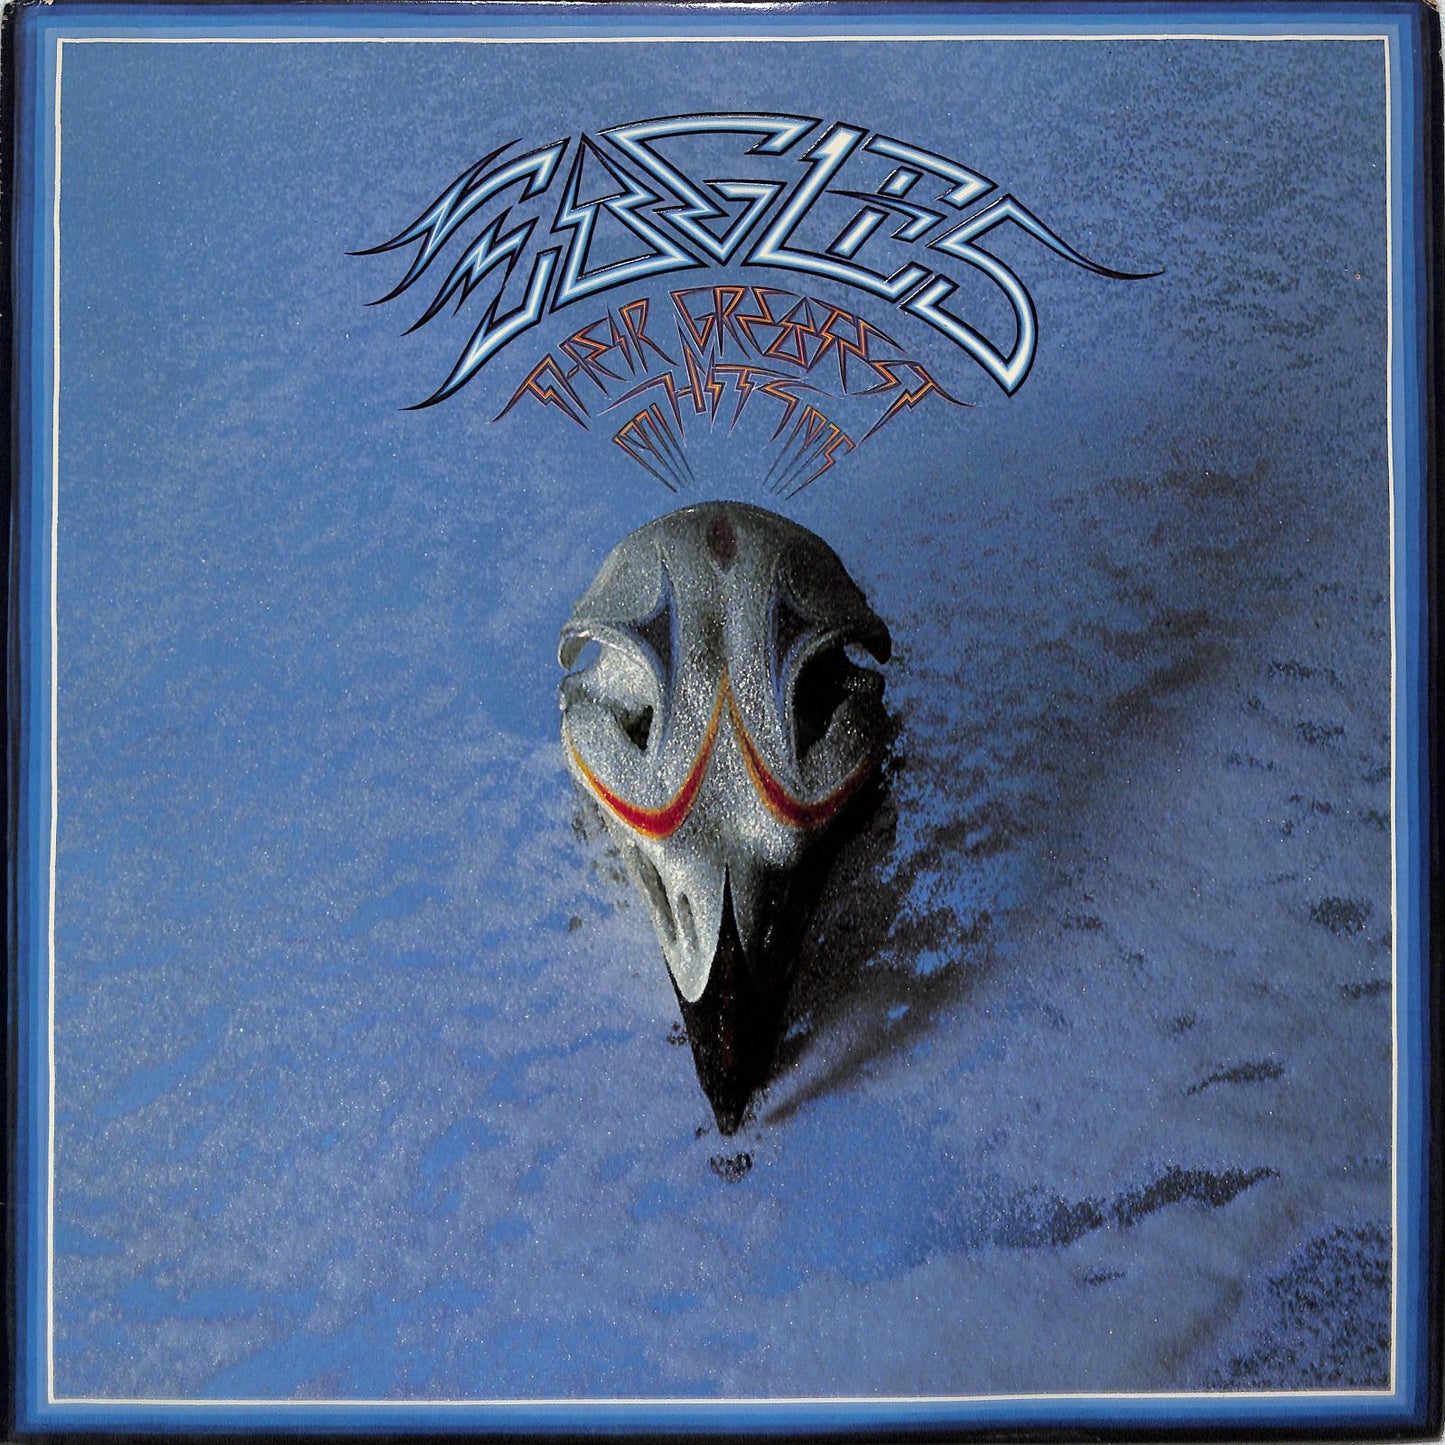 EAGLES - Their Greatest Hits 1971-1975